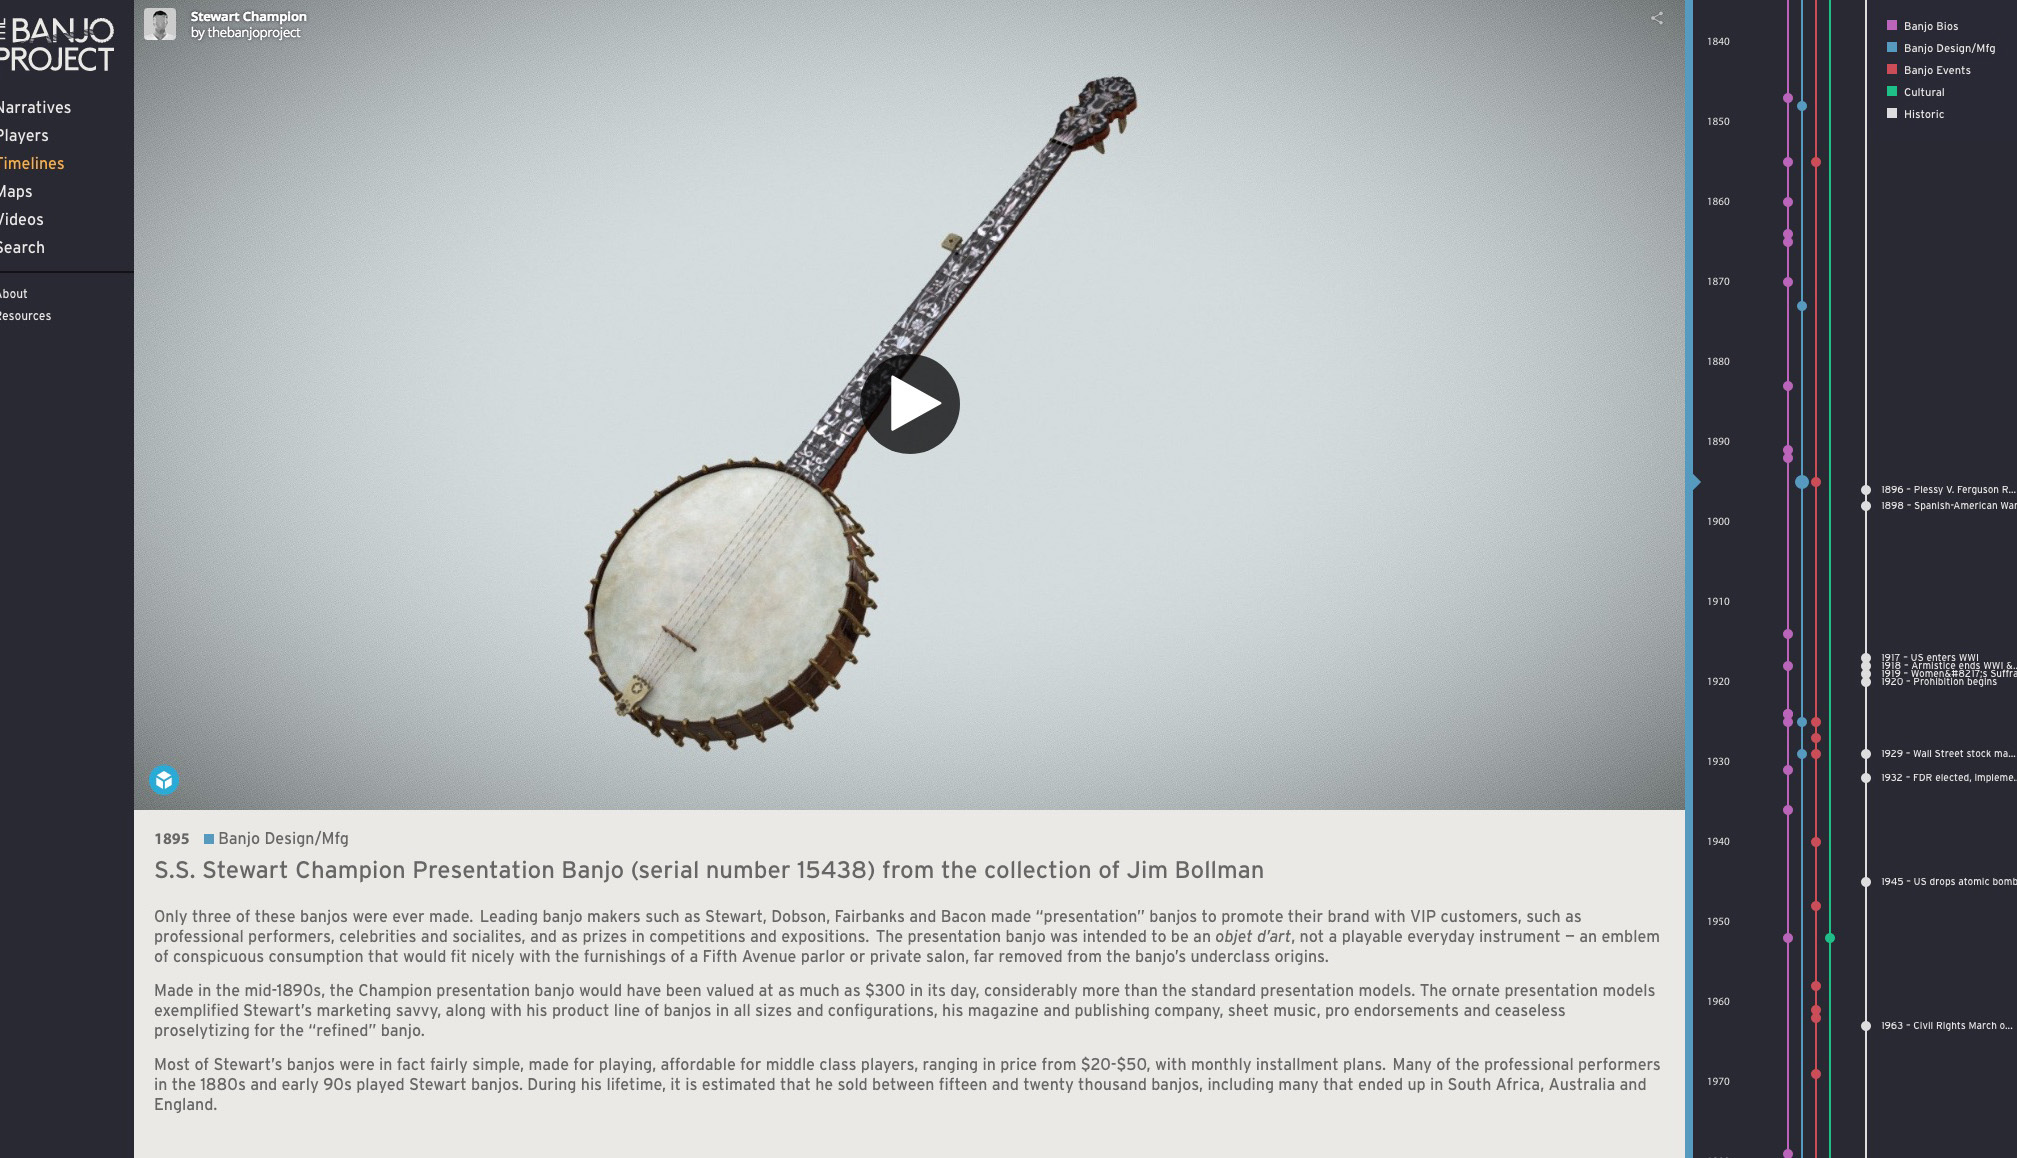 A screenshot from The Banjo Project showing an image of an antique banjo